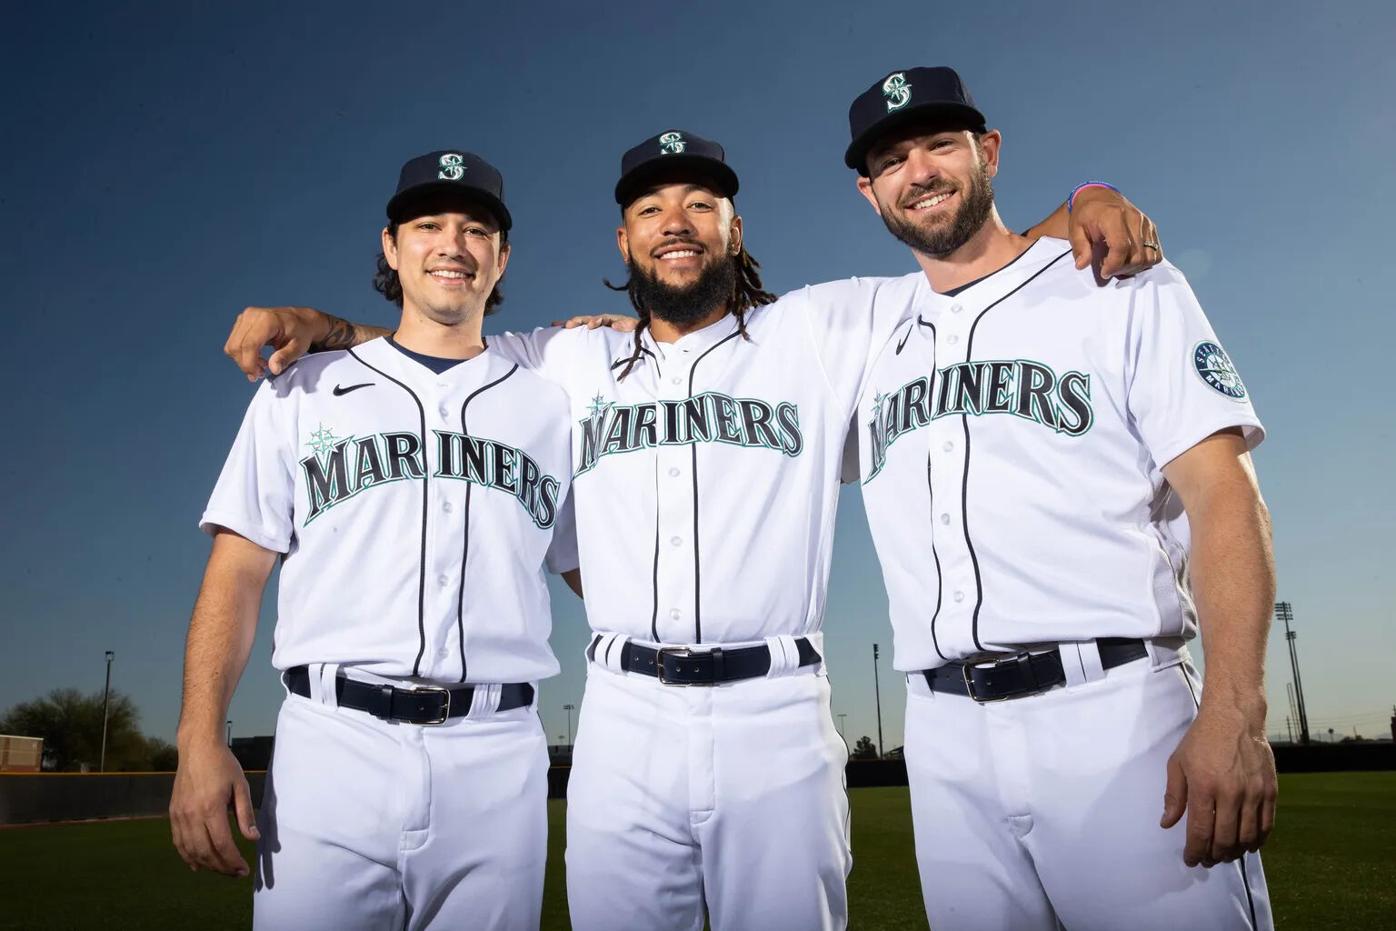 The drought is over! Mariners fans are ready for postseason baseball 